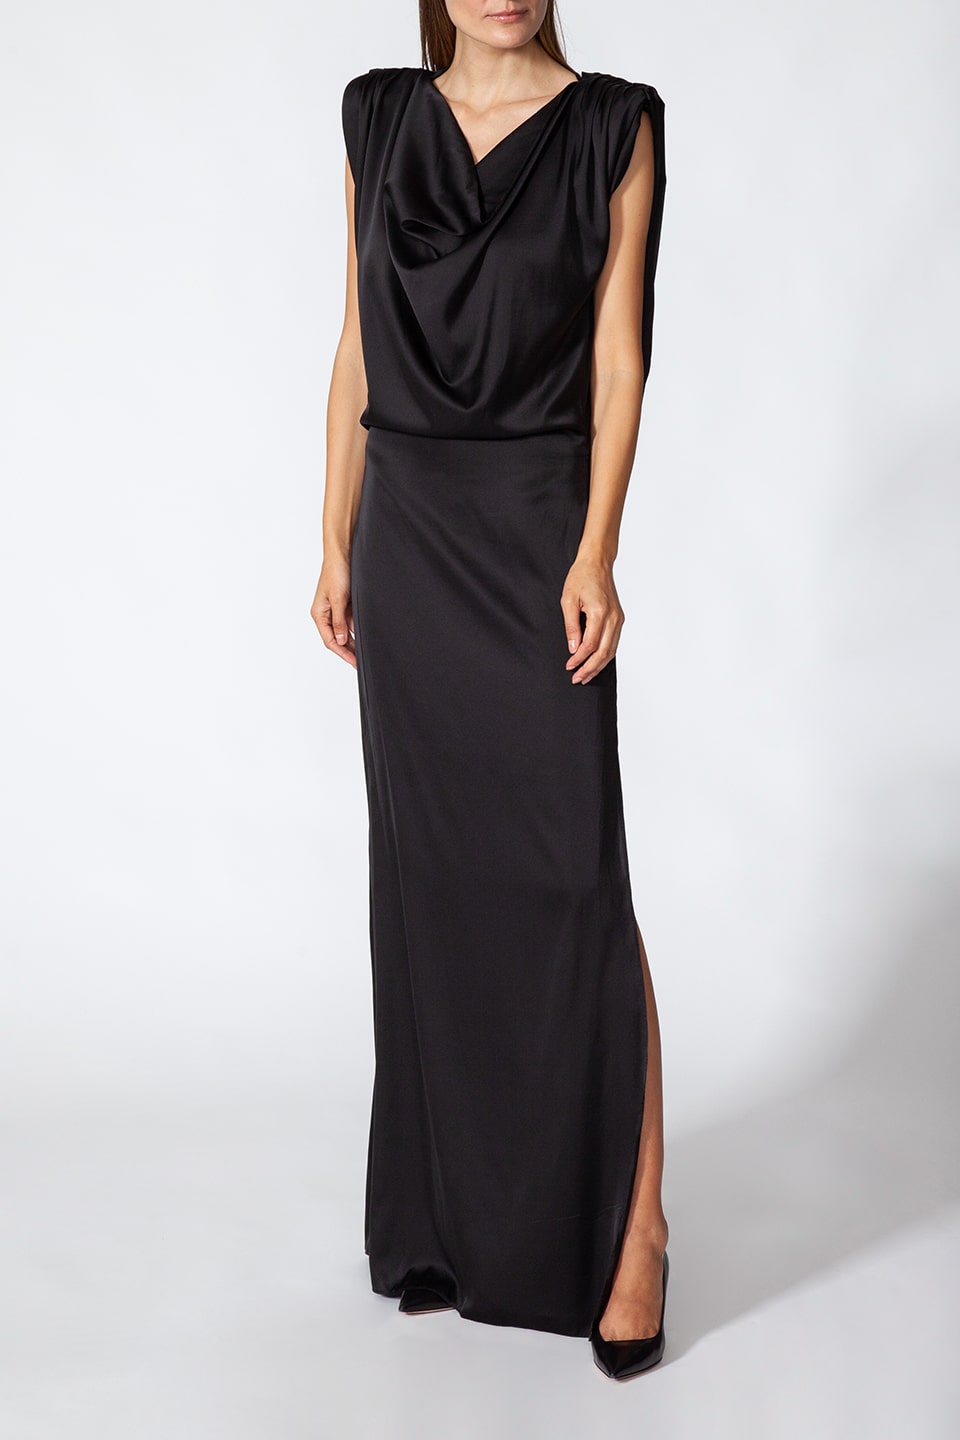 Elegant dress from fashion designer. Special occasions black Maxi Dress to shop online. Product gallery 1